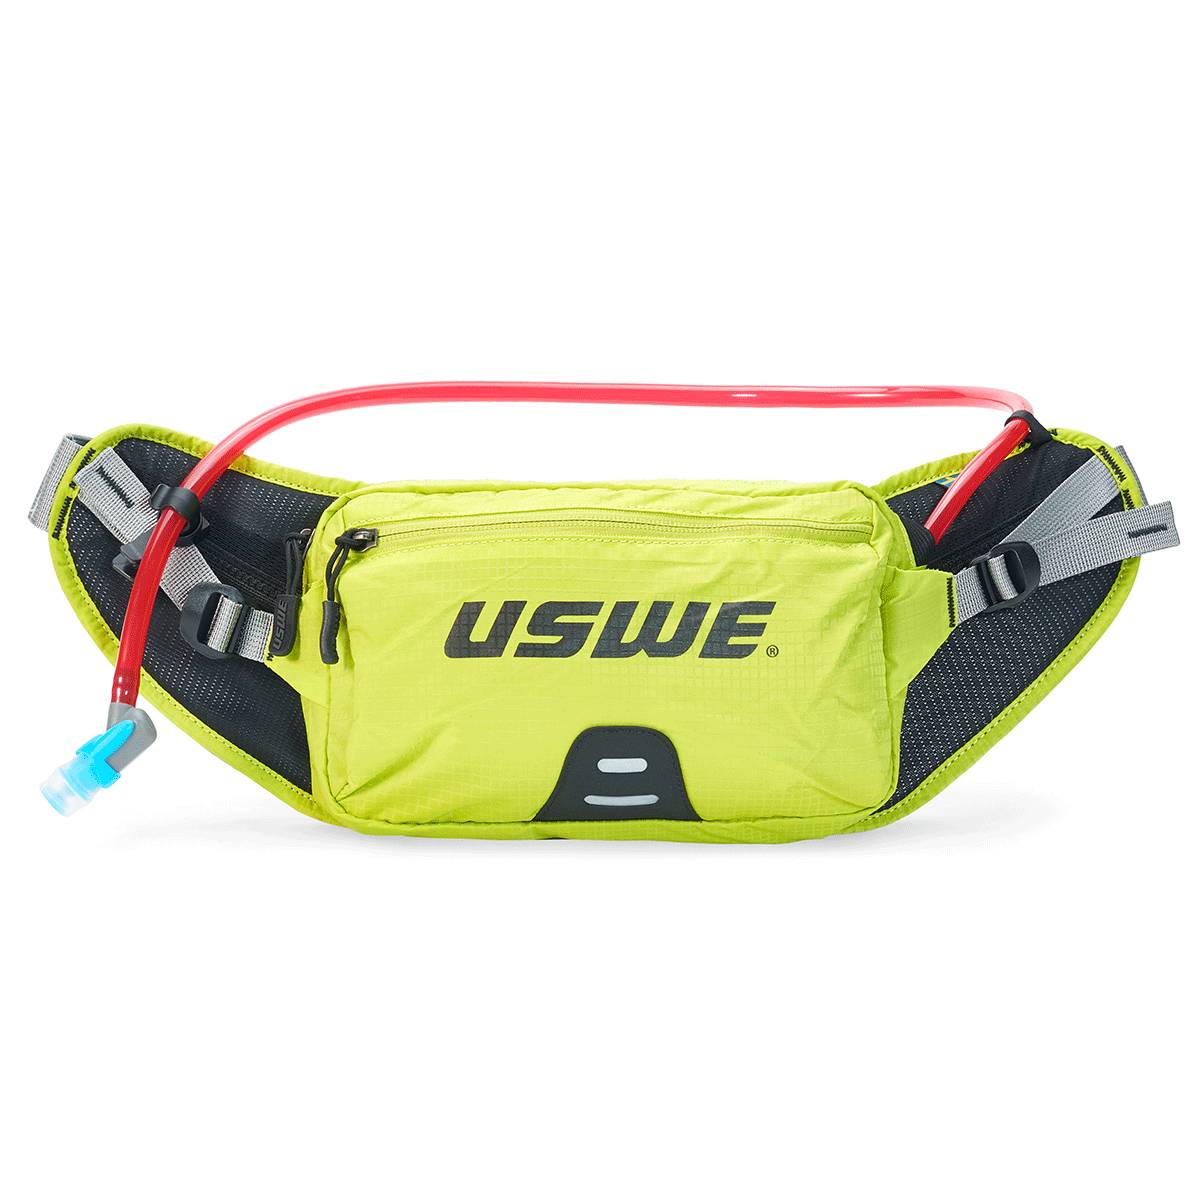 USWE ZULO 2L HYDRATION WAST PACK 1L